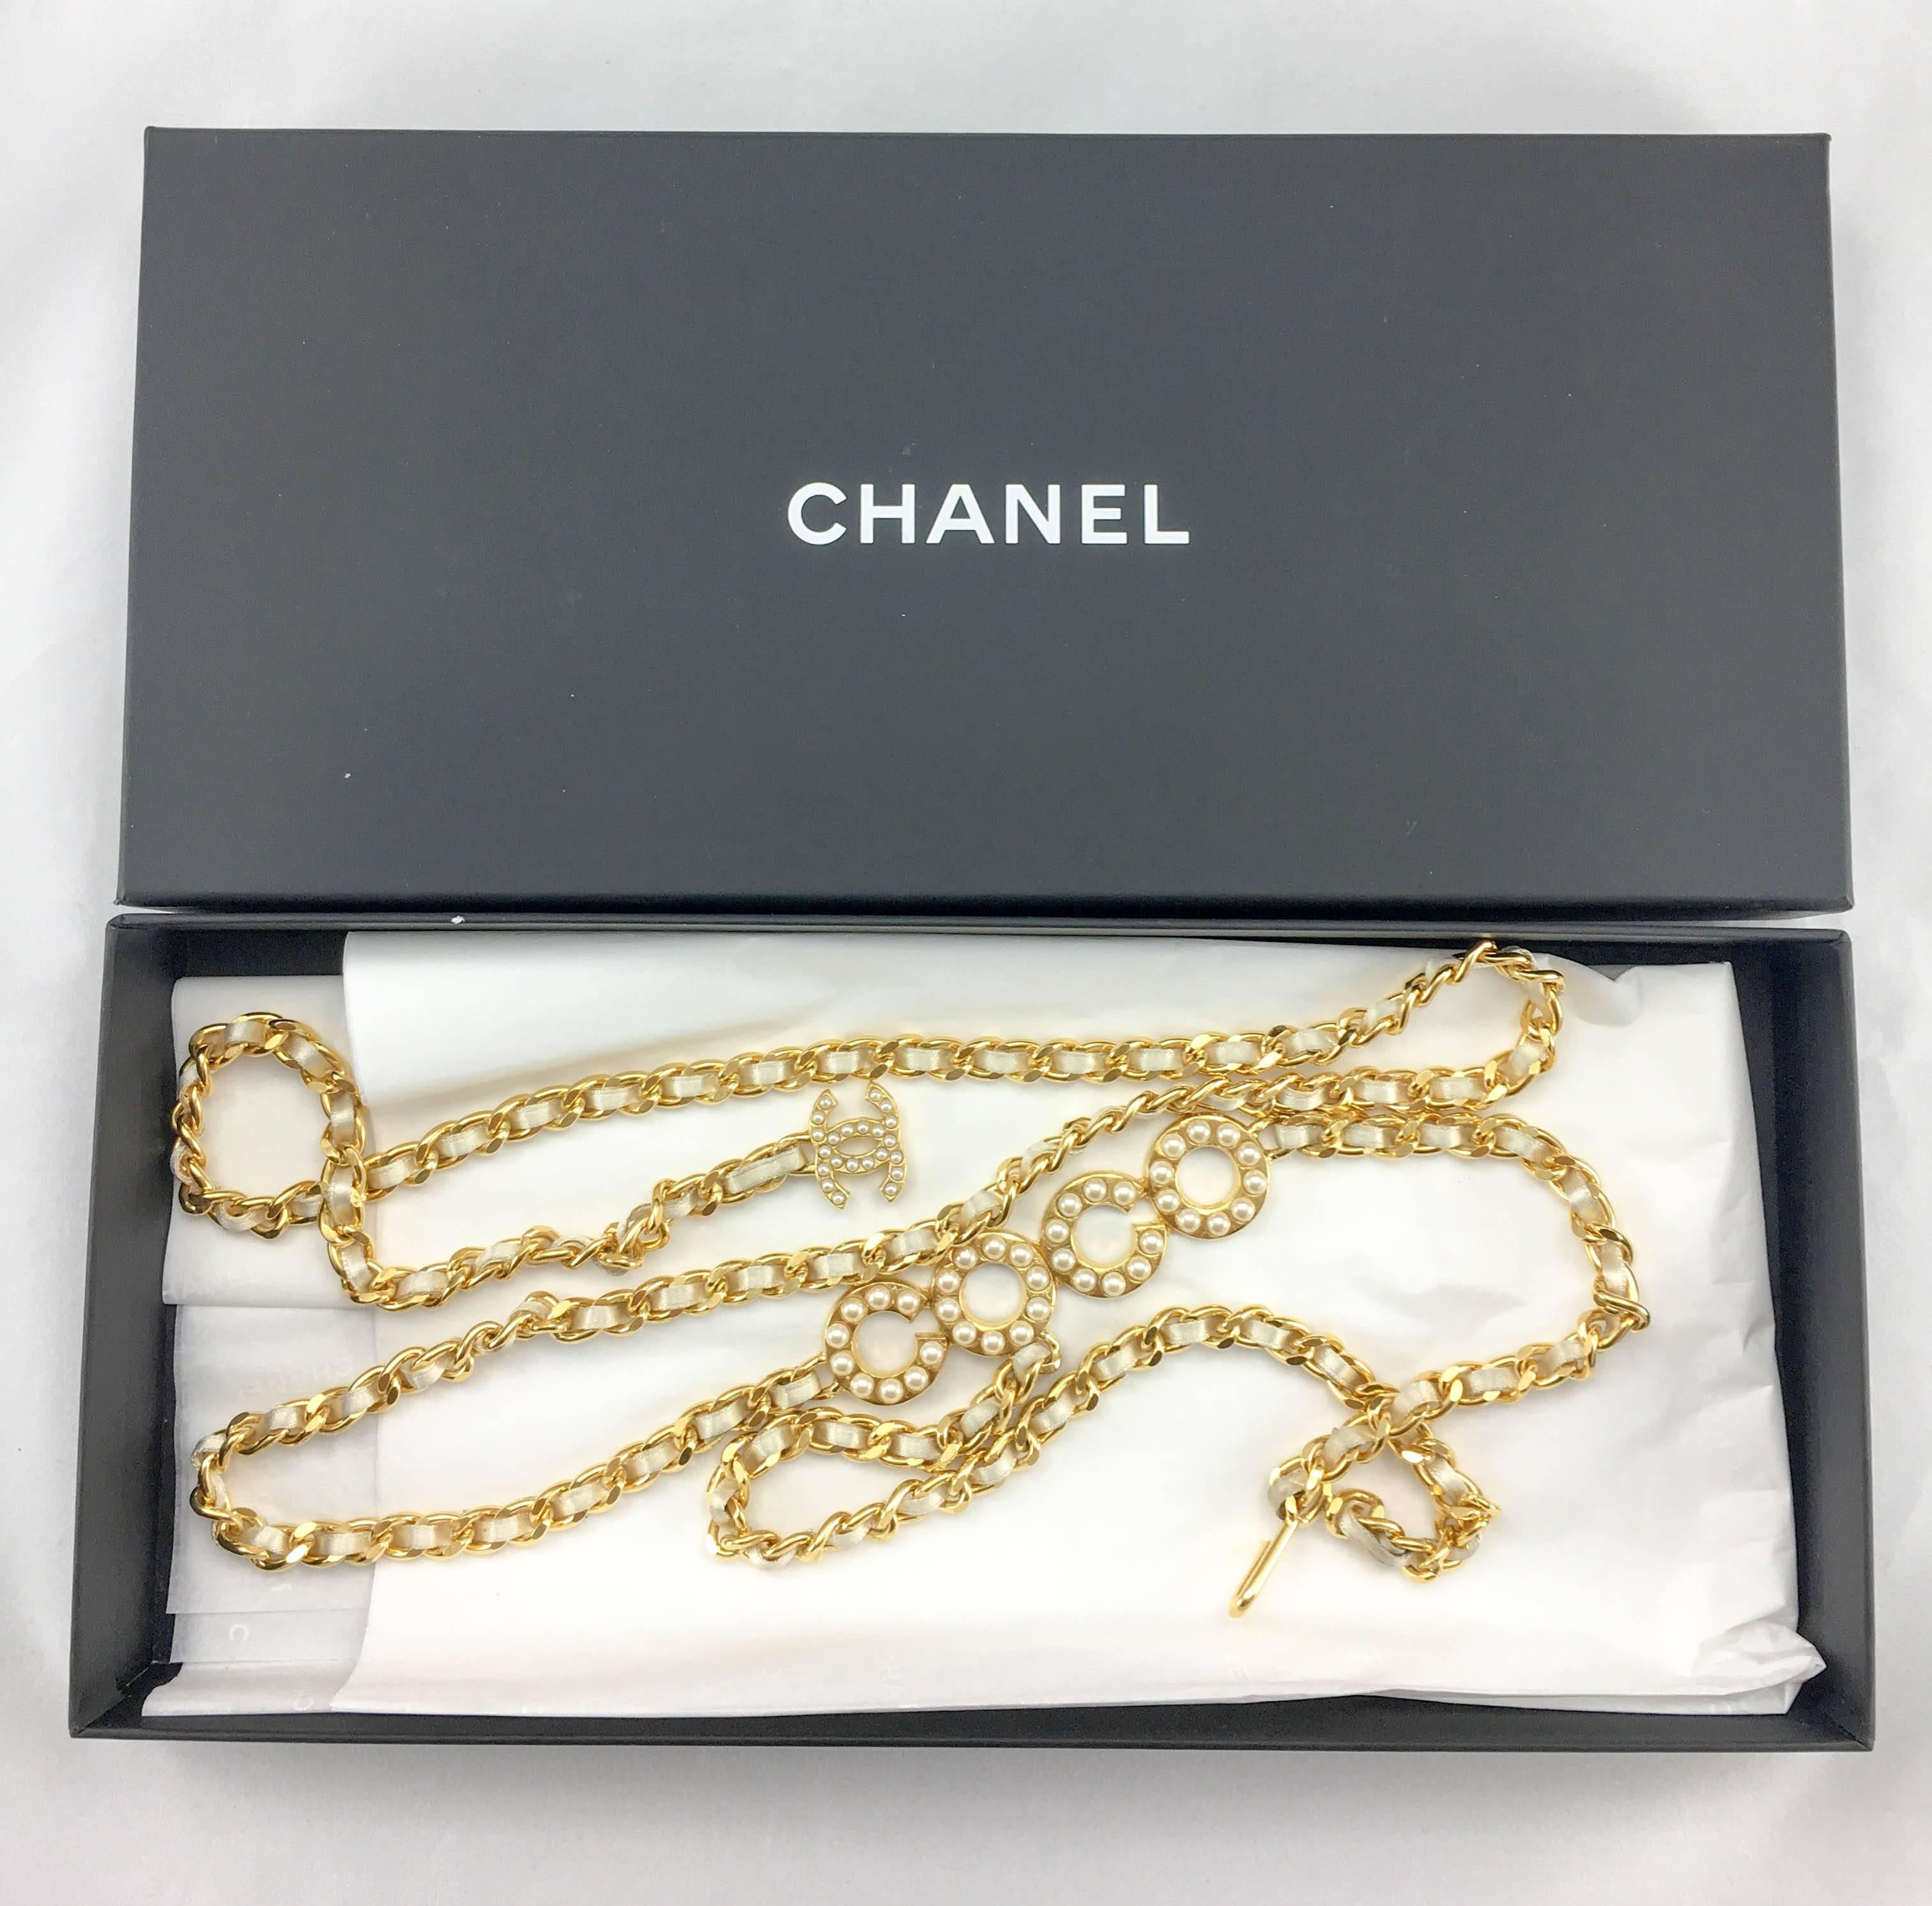 Chanel Gold-Tone Woven Chain and Faux Pearl 'Coco' Belt / Necklace - 2001 5